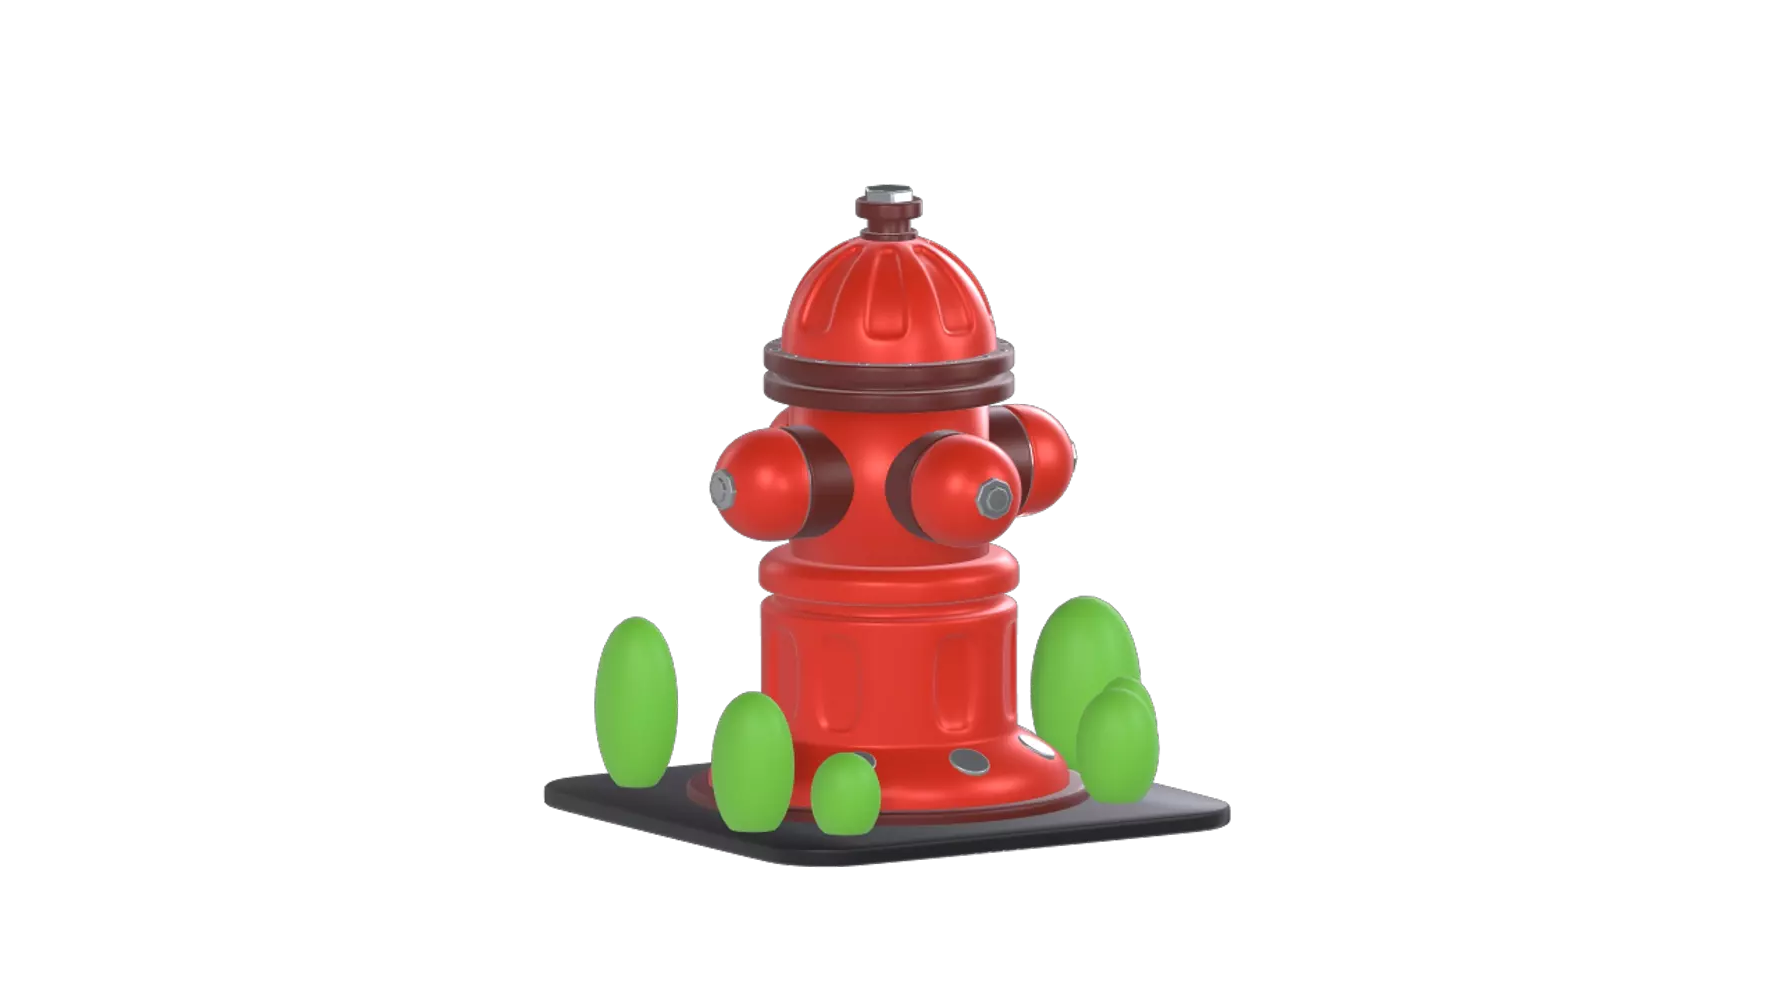 Hydrant 3D Graphic